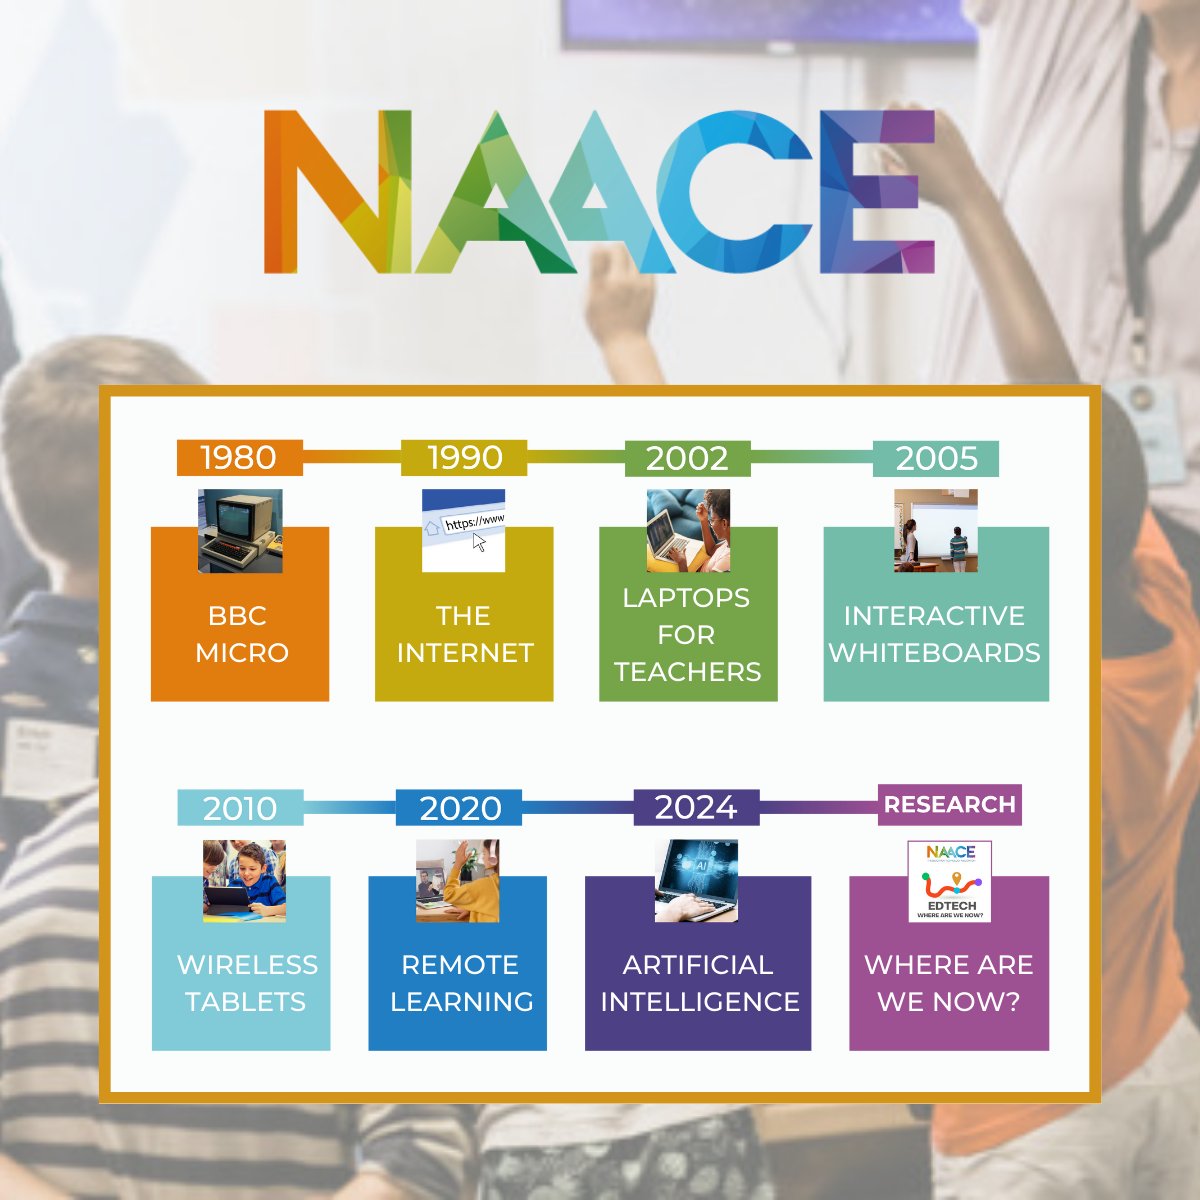 To mark #Naace40 we’re reflecting on key #EdTech since we formed in 1984. In 2002, #DfE launched ‘Laptops for Teachers’. This was one of the first instances of #EdTech being rolled out at scale. To learn more, follow the link: naace-research-hub.co.uk